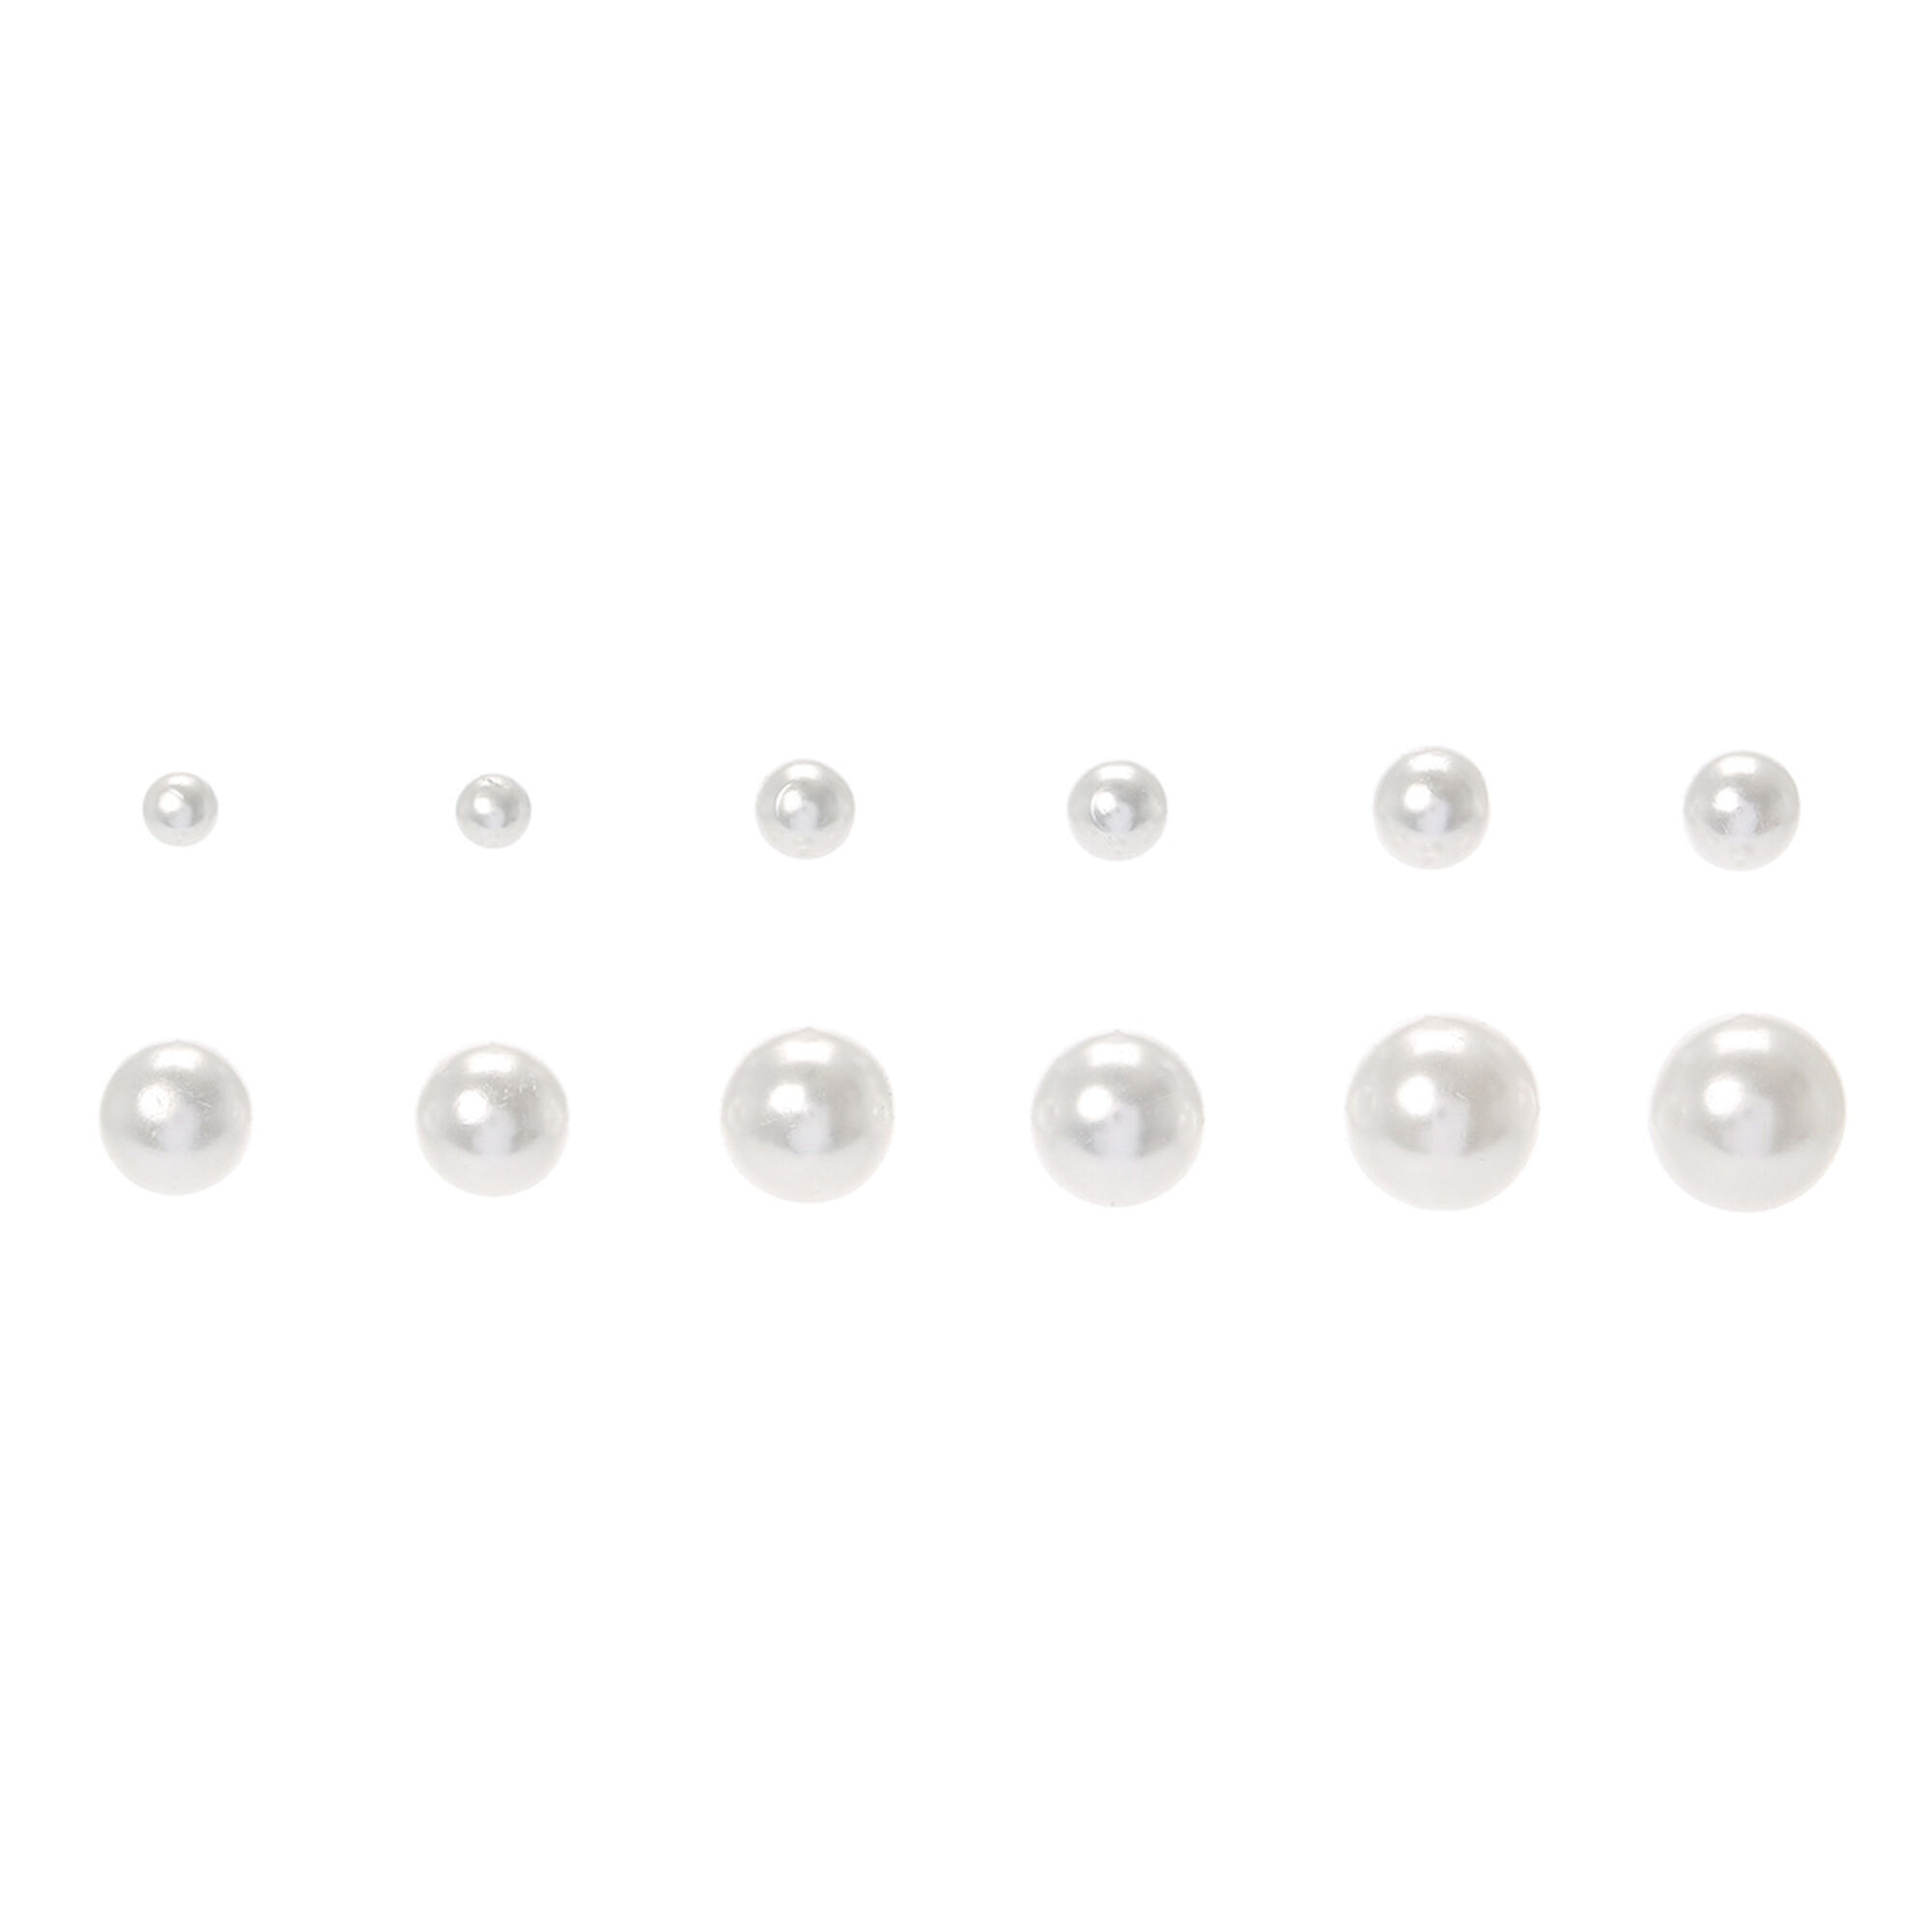 View Claires 6 Pack Pearl Stud Earrings White information